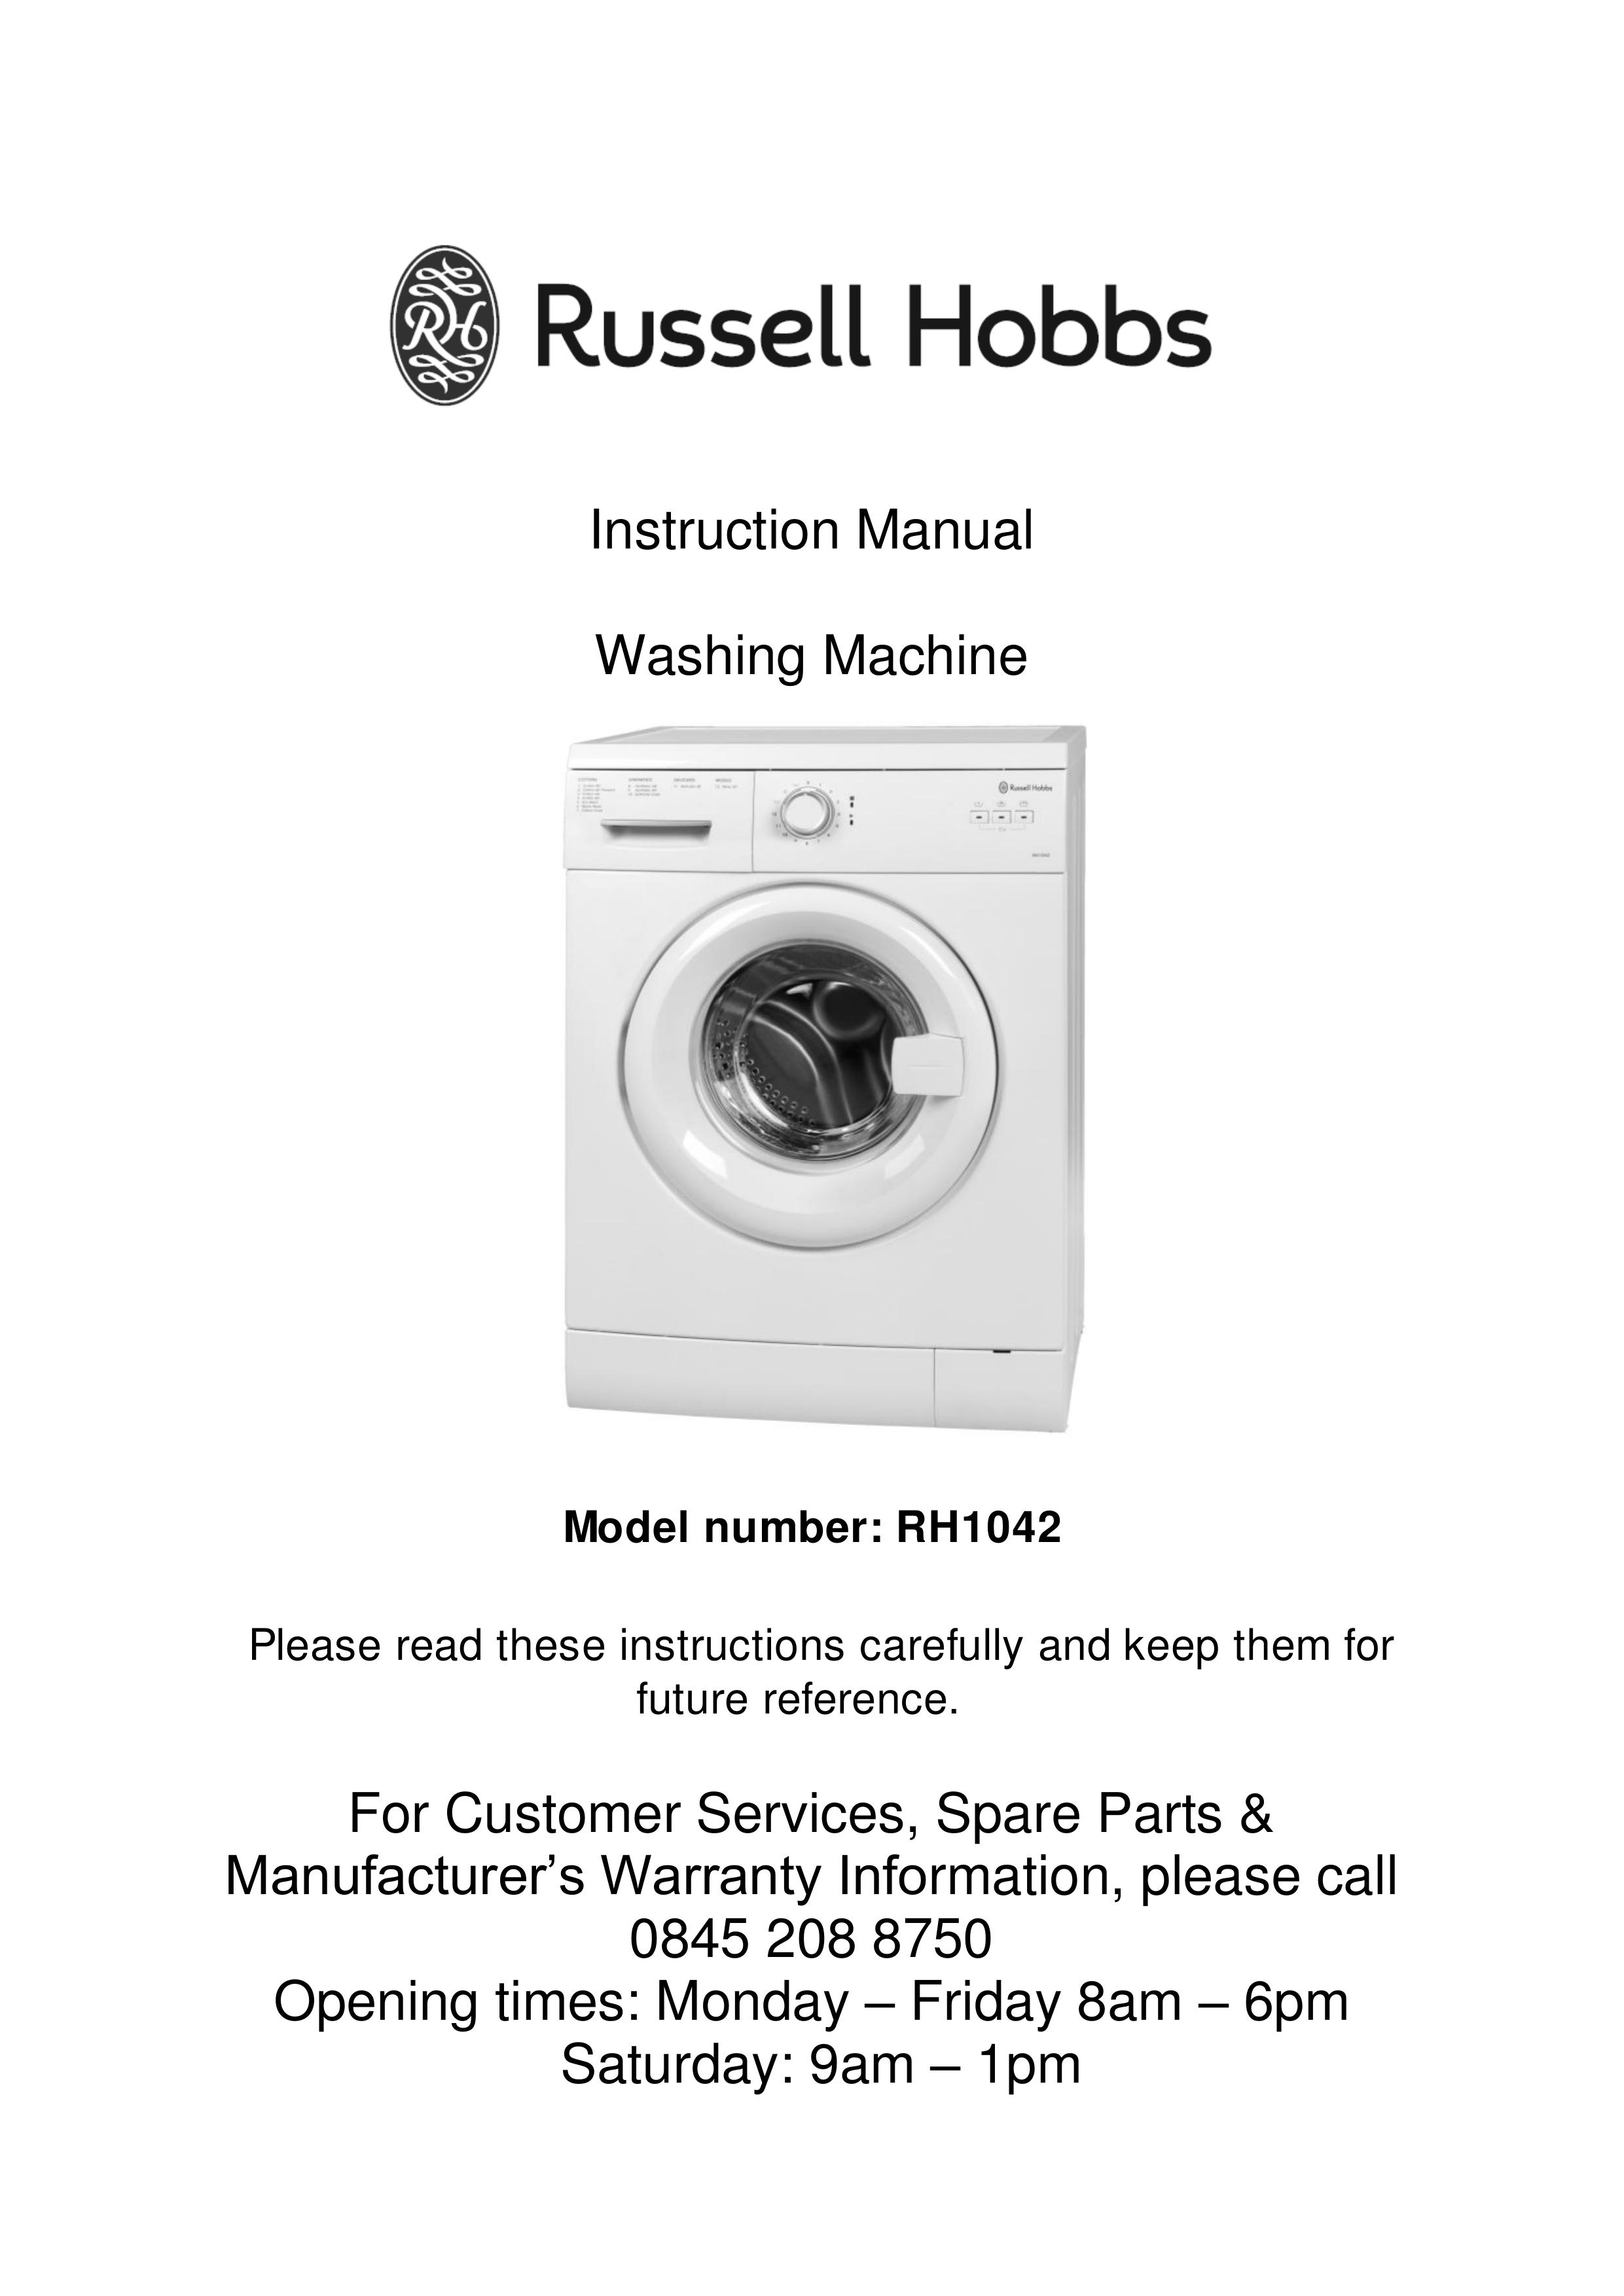 Russell Hobbs RH1042 Washer User Manual